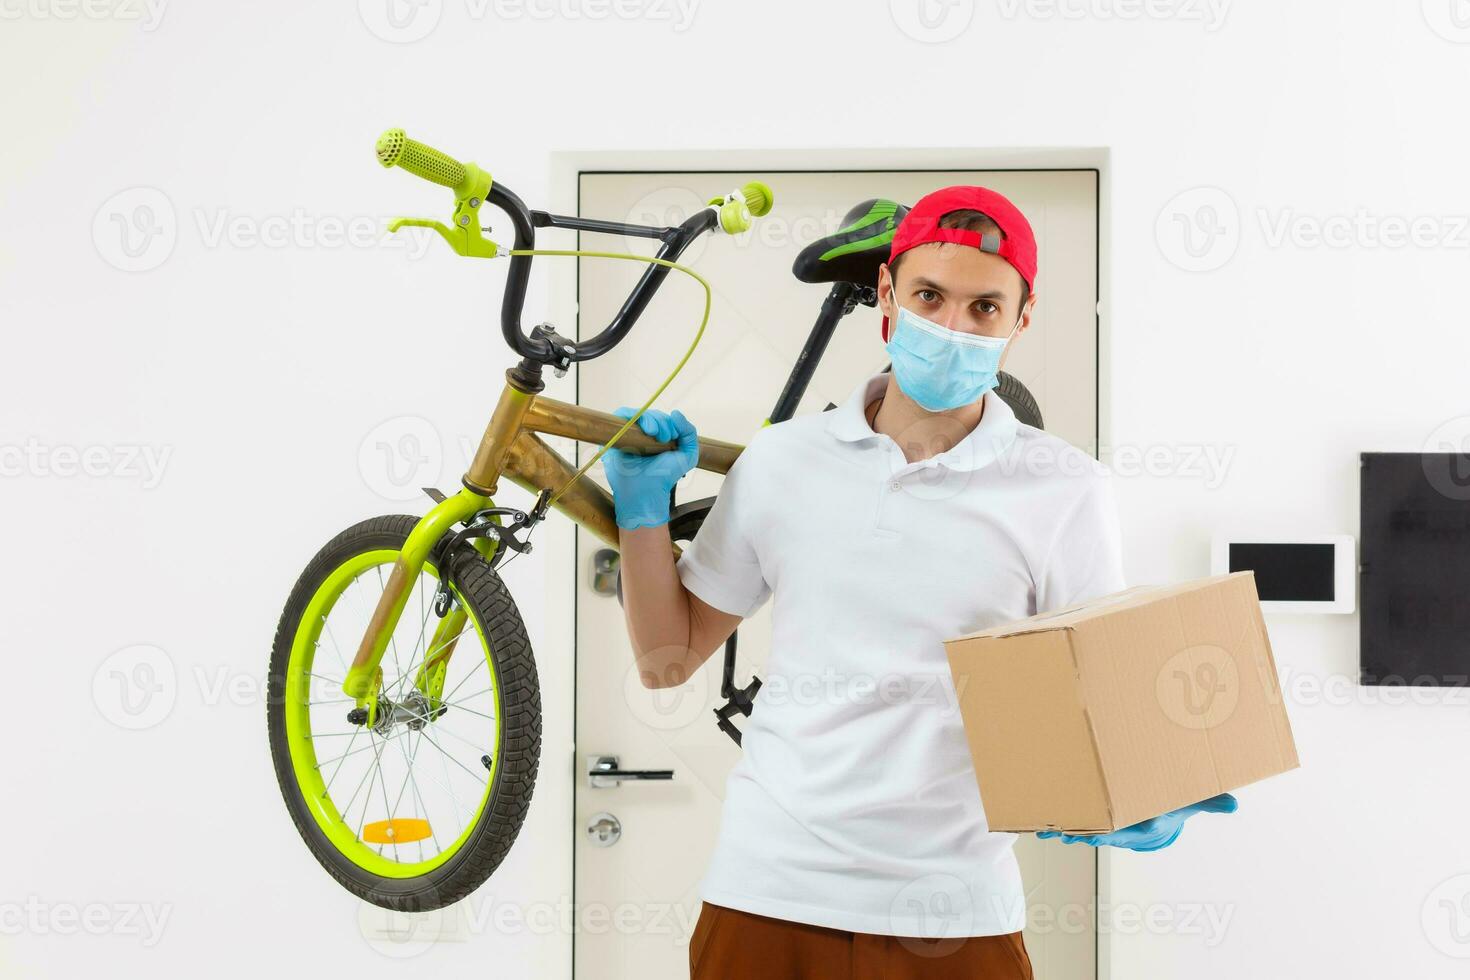 home delivery, online order. A man in uniform, a medical mask and rubber gloves with a box, a parcel in his hands. Food and food delivery during the quarantine of the coronavirus pandemic photo